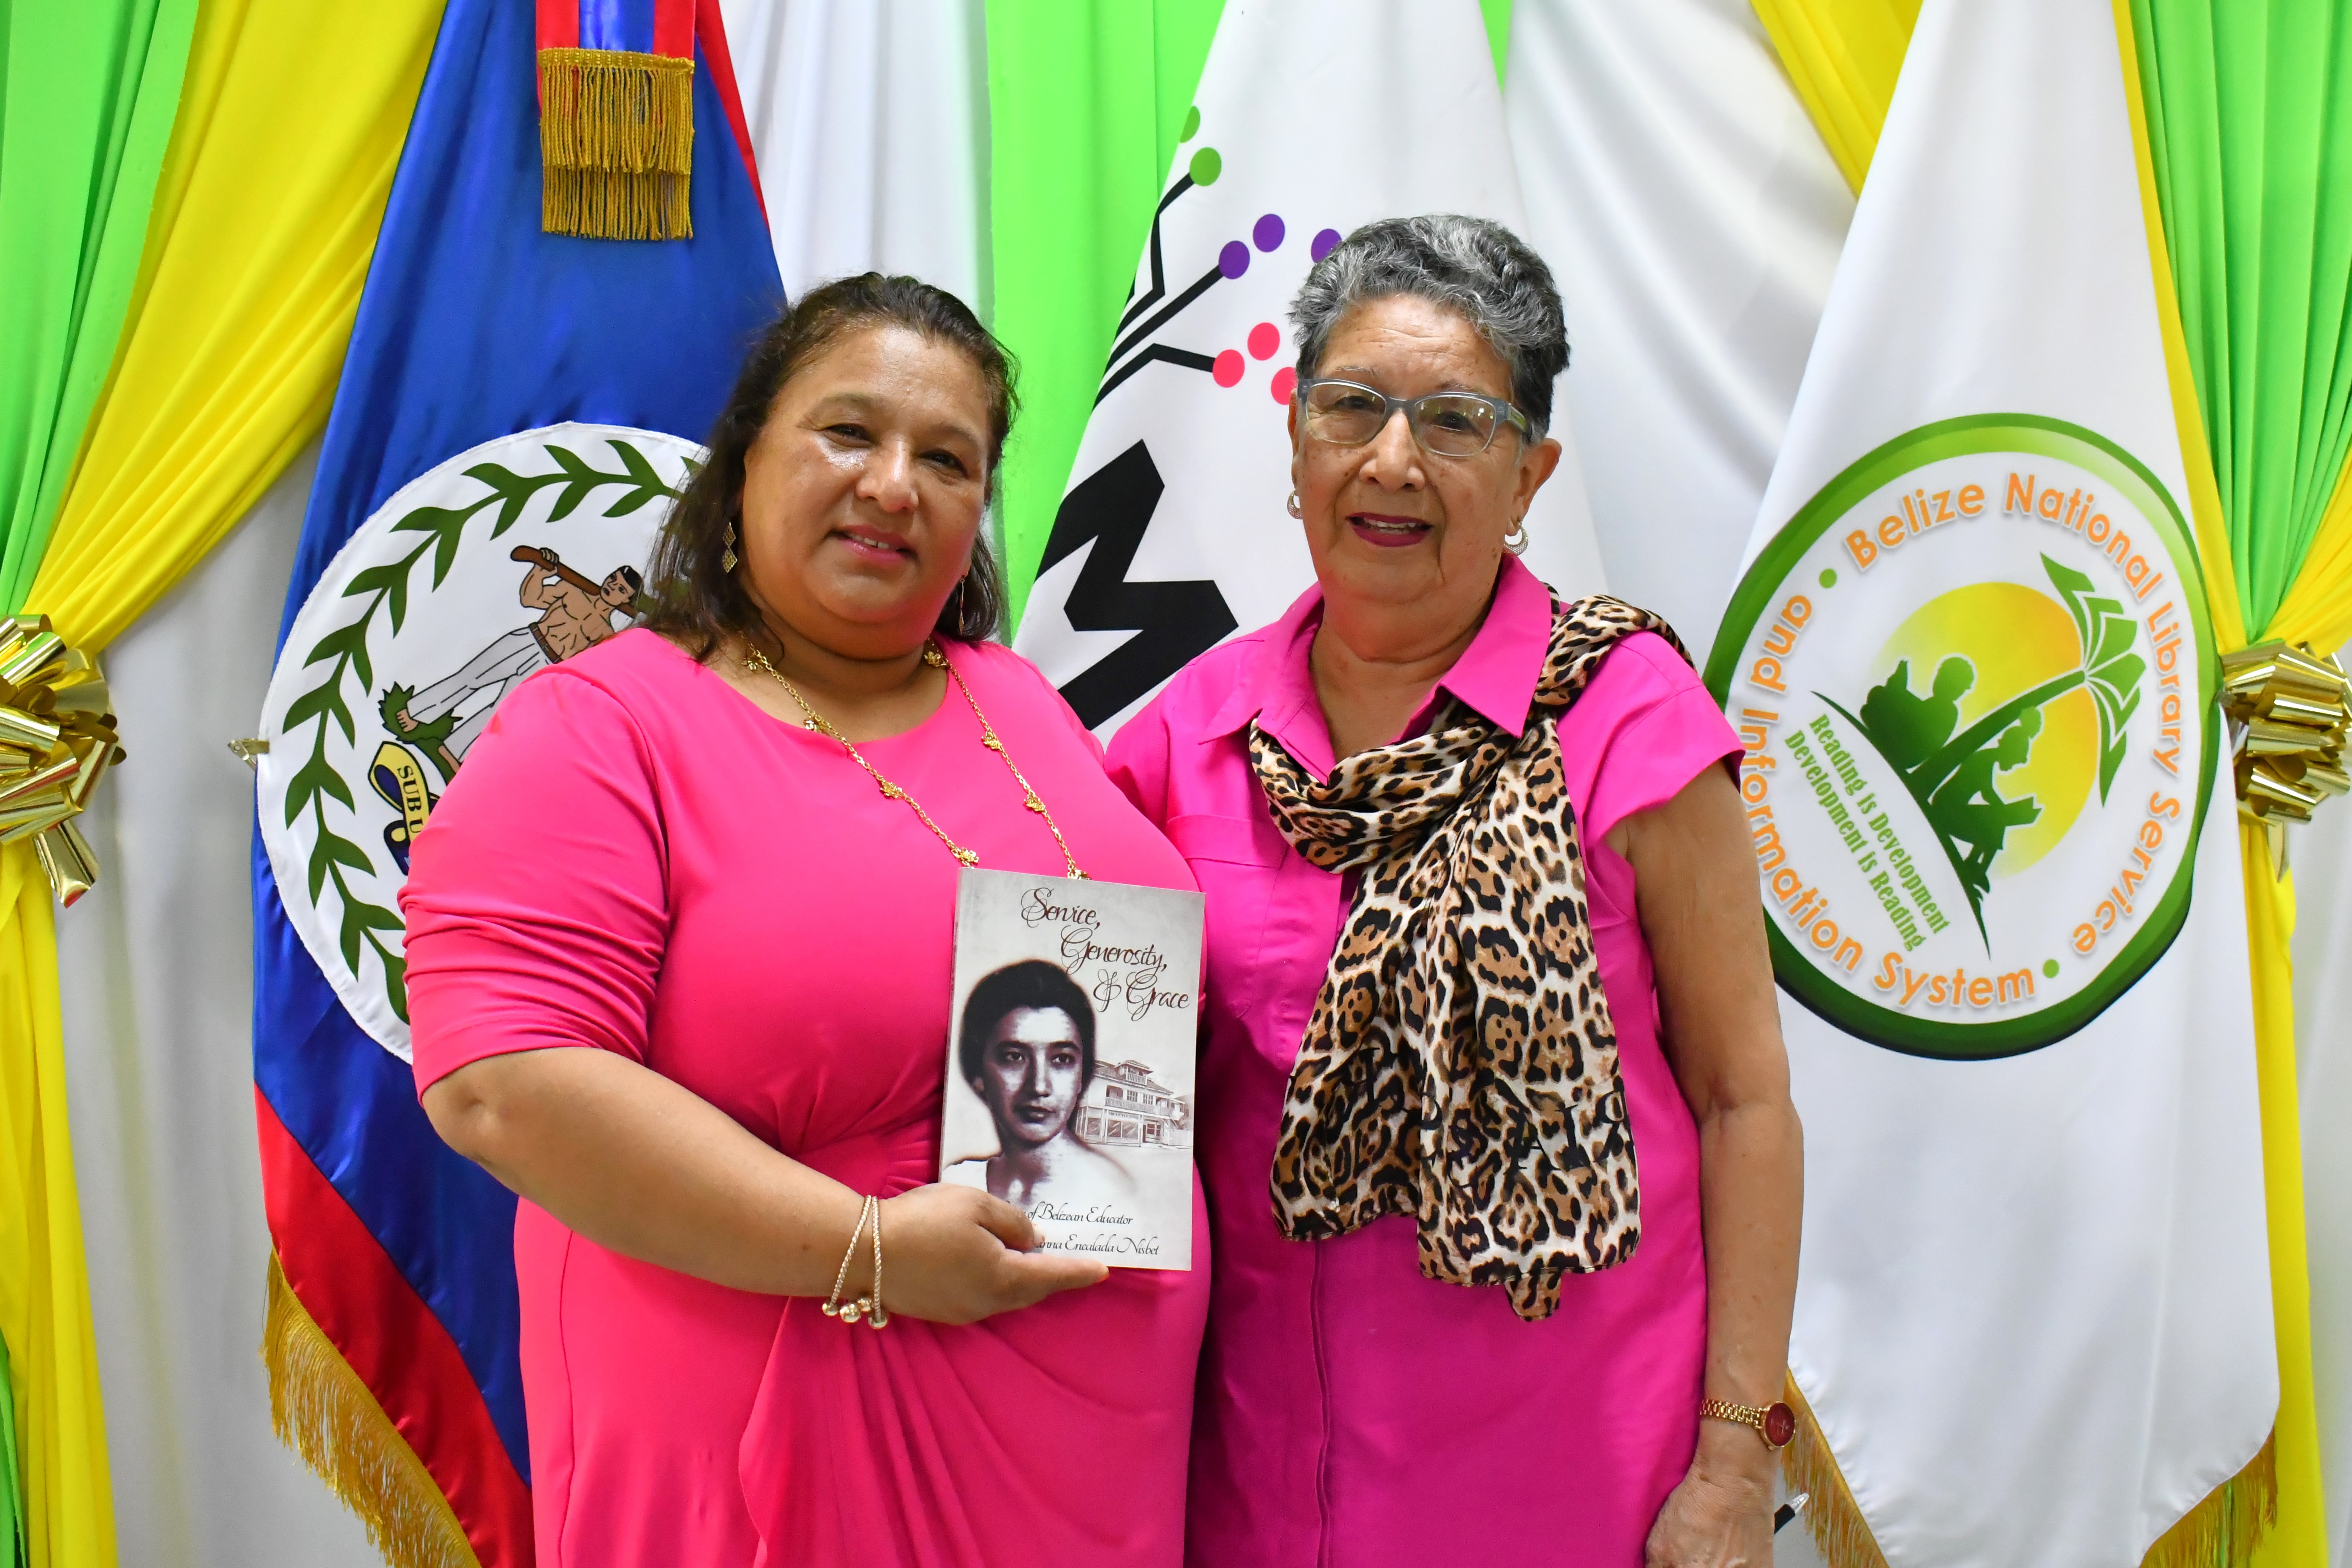 Launch Event of the Service Generosity and Grace Book - The Story of Belizean Educator  Deanna Encalada Nisbet